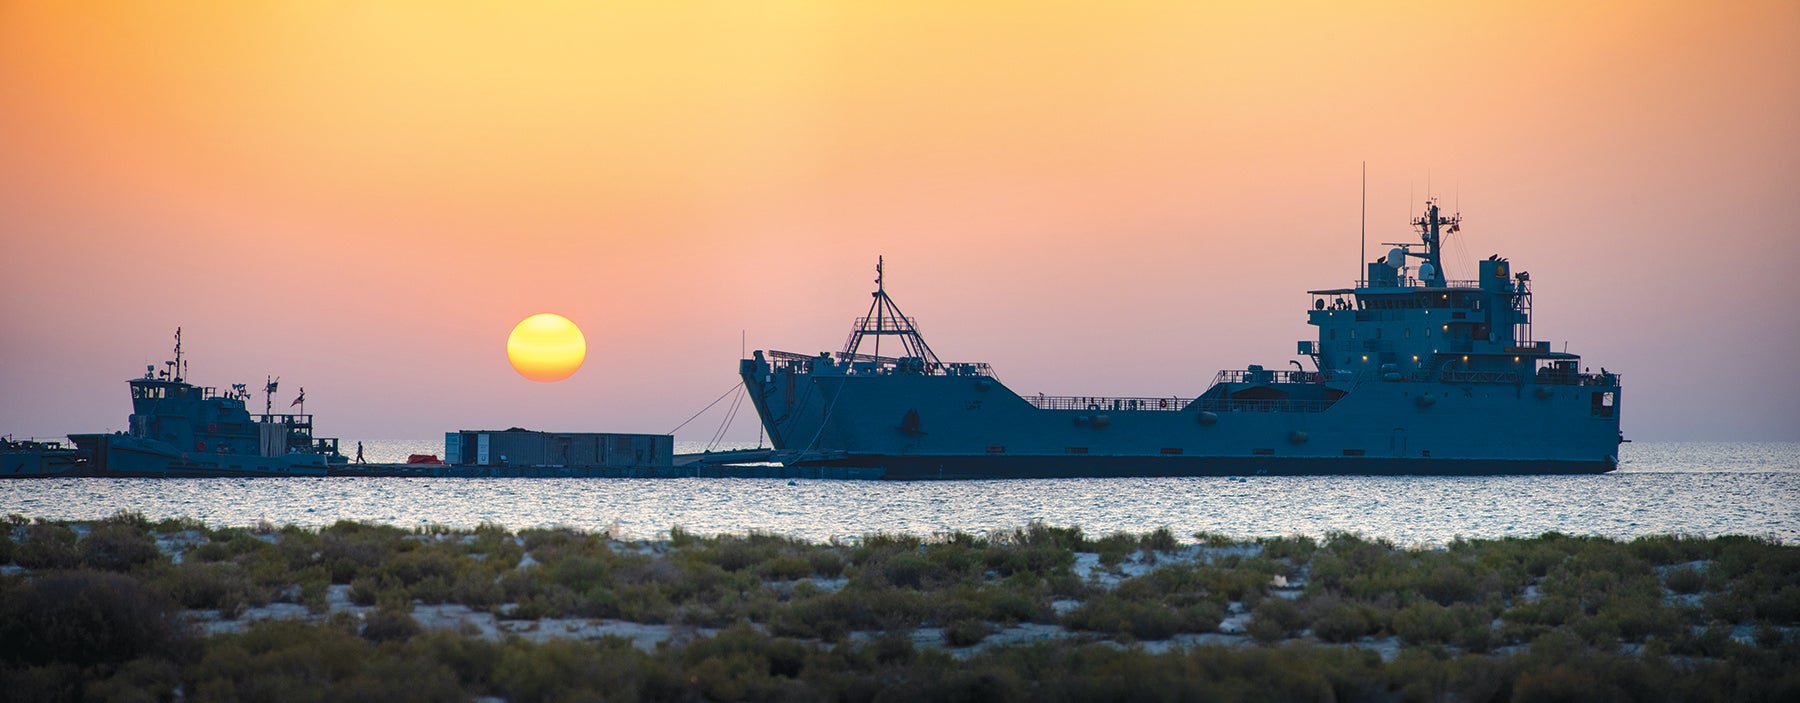 The U.S. Army Vessel Major General Charles P. Gross, a Logistics Support Vessel, and a smaller tugboat are moored during a joint logistics-over-the-shore exercise in the United Arab Emirates. (Credit: U.S. Army/Spc. Travis Teate)